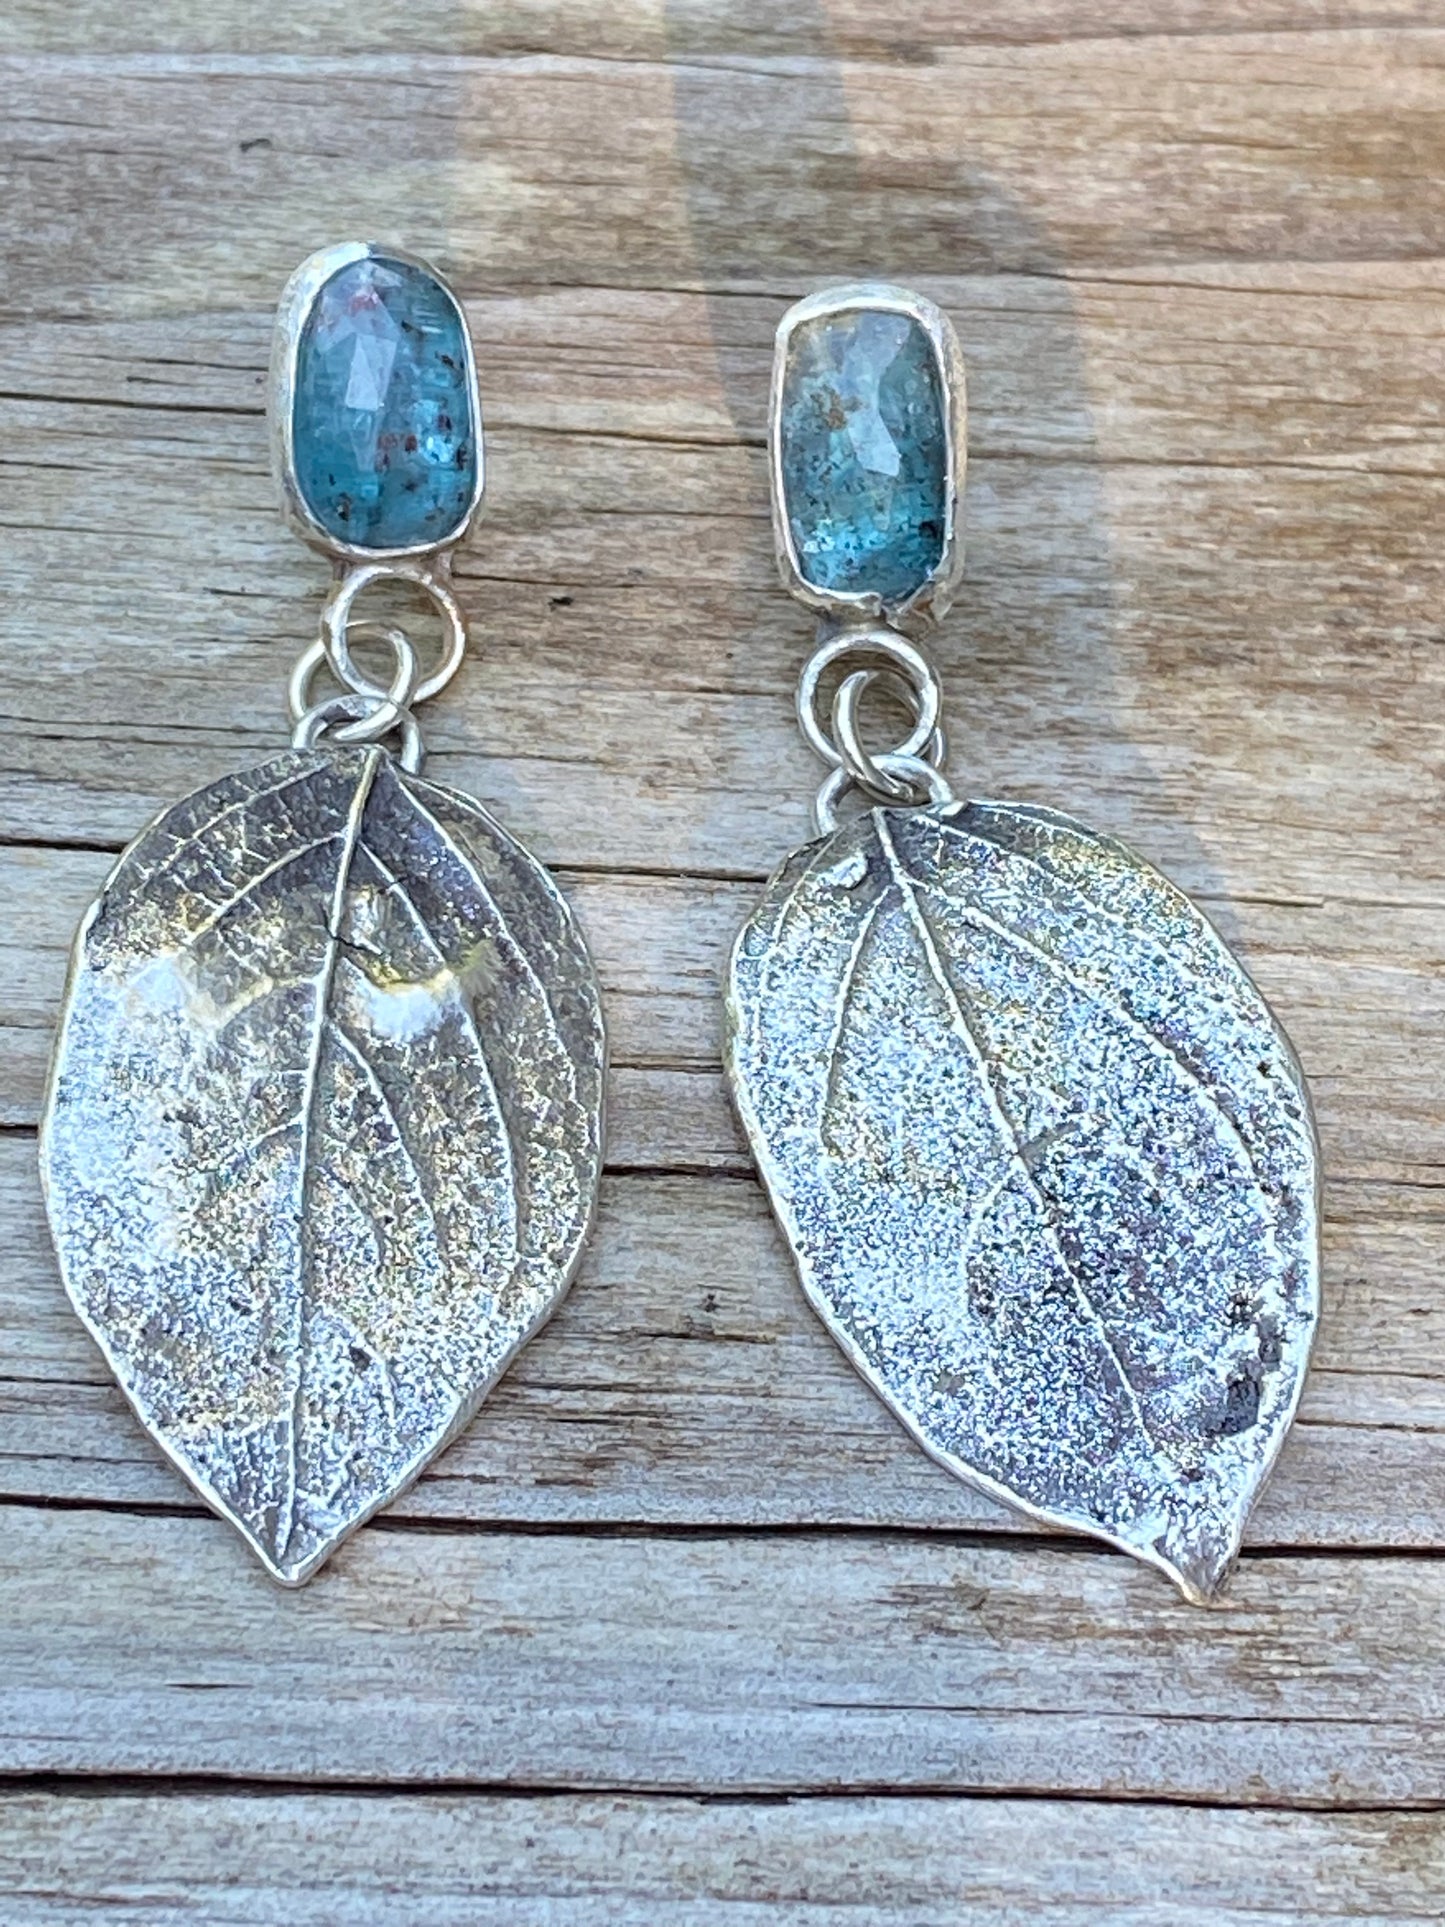 Teal Moss Kyanite gemstone & Silver leaf earrings - collectionsbytracy.com